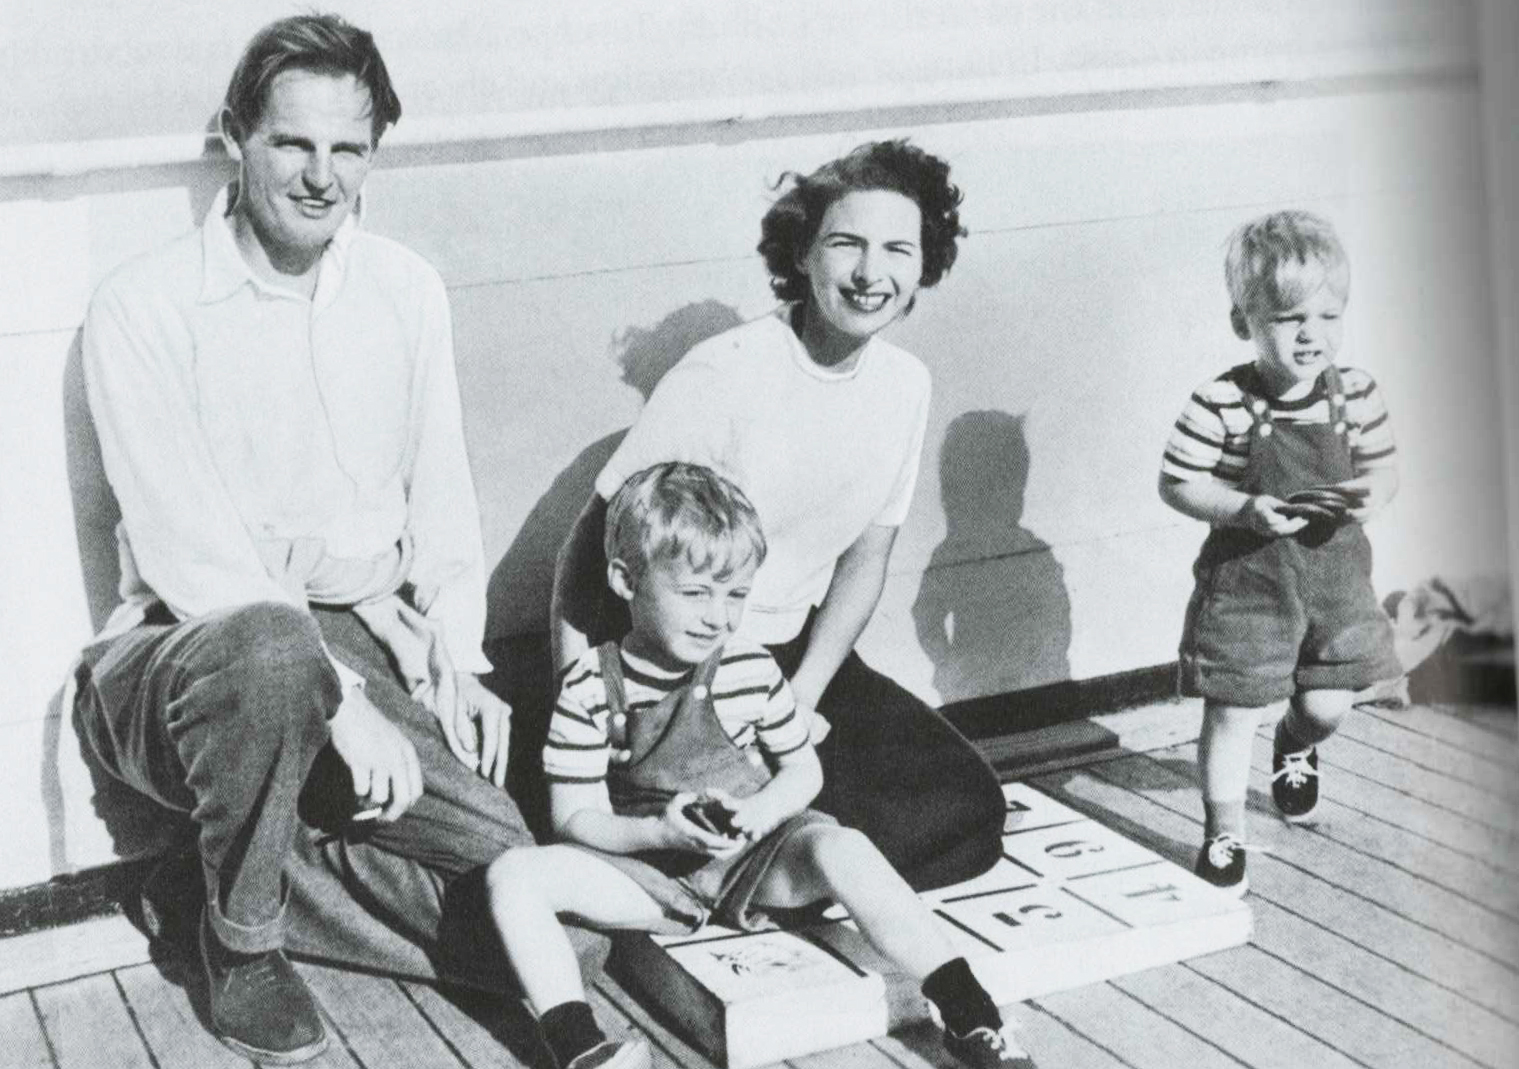 The Maclean family, 1950. Left to right: Donald, Fergus, Melinda, and Donald. 